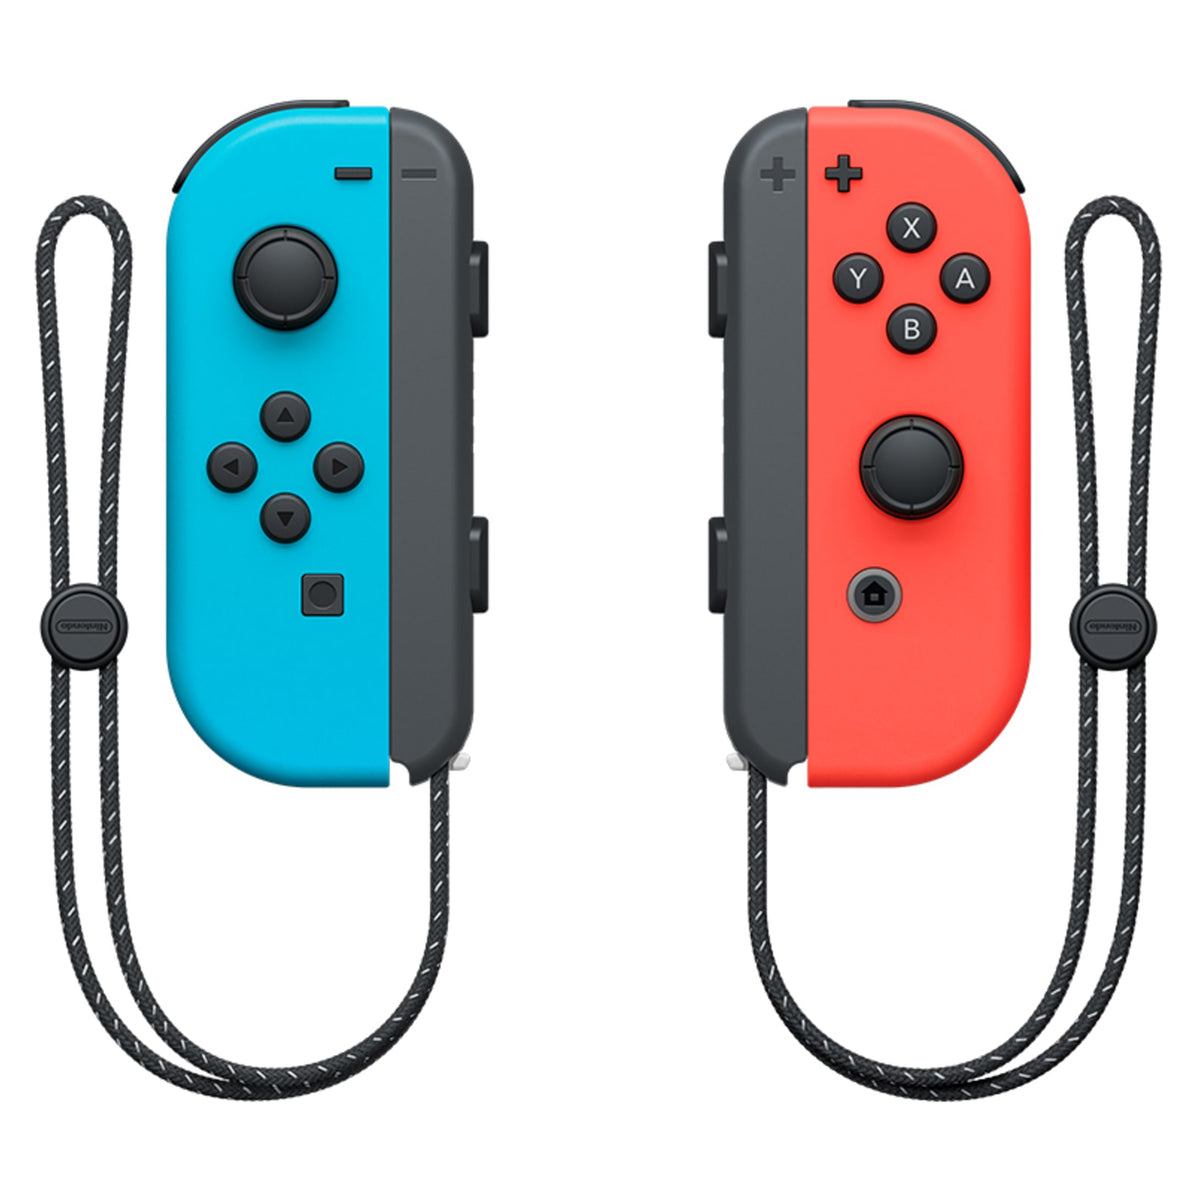 Nintendo Switch OLED | Color Neon